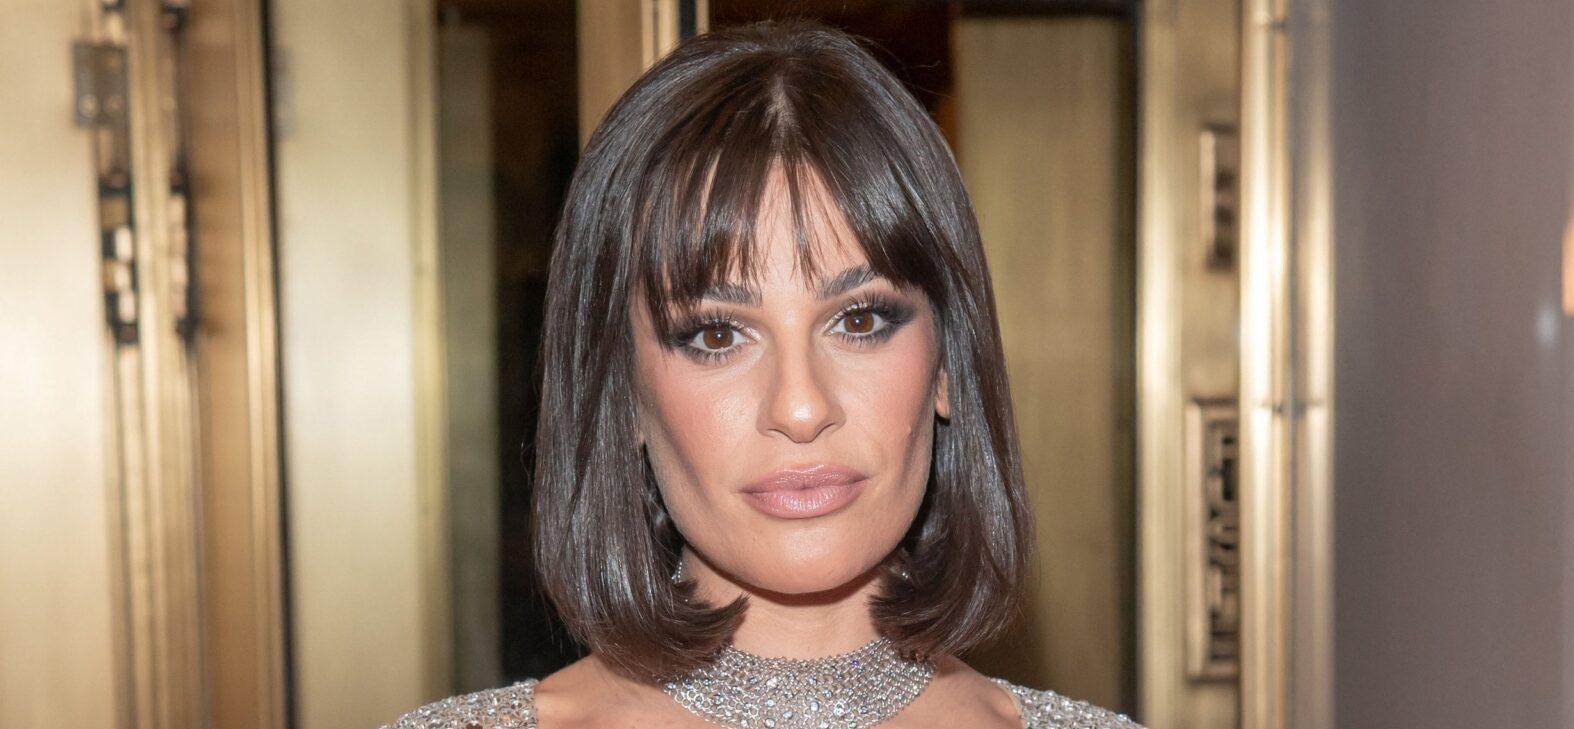 ‘Glee’ Star Lea Michele Announces Pregnancy For Baby No. 2 With Stunning Photos